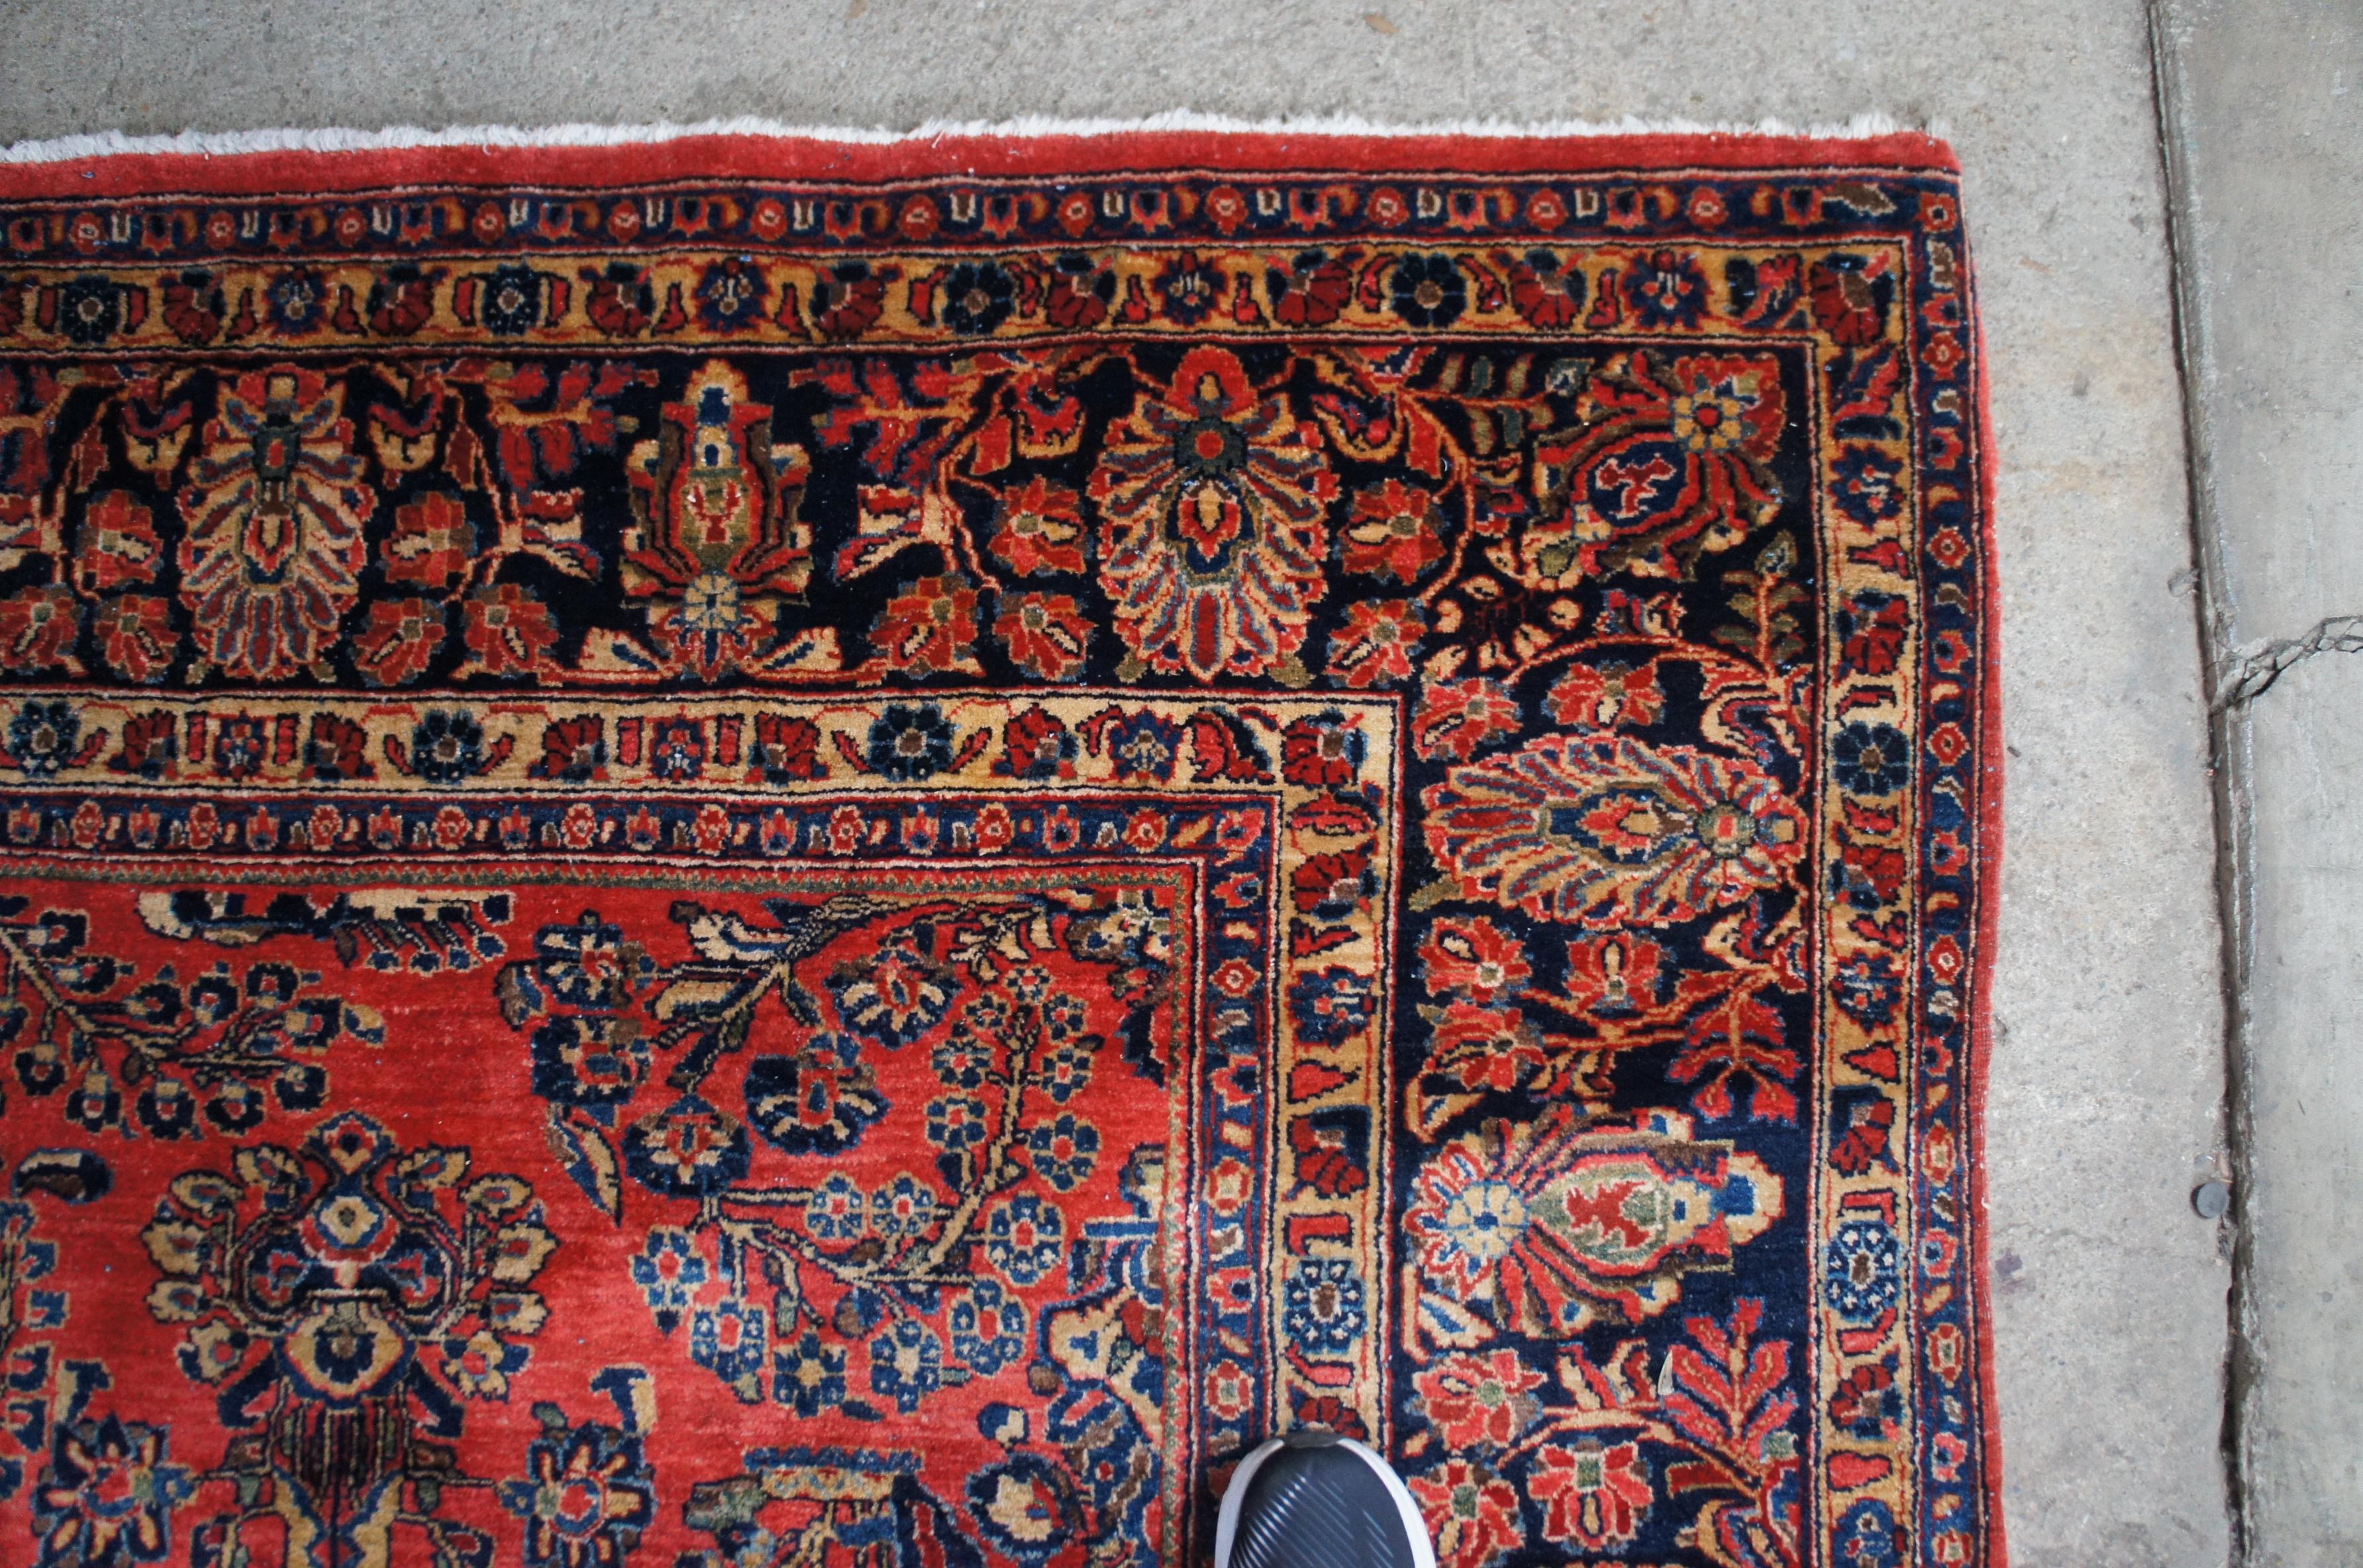 Vintage Persian Sarouk Hand Knotted Red Floral Wool Area Rug Carpet 9' x 12' For Sale 2